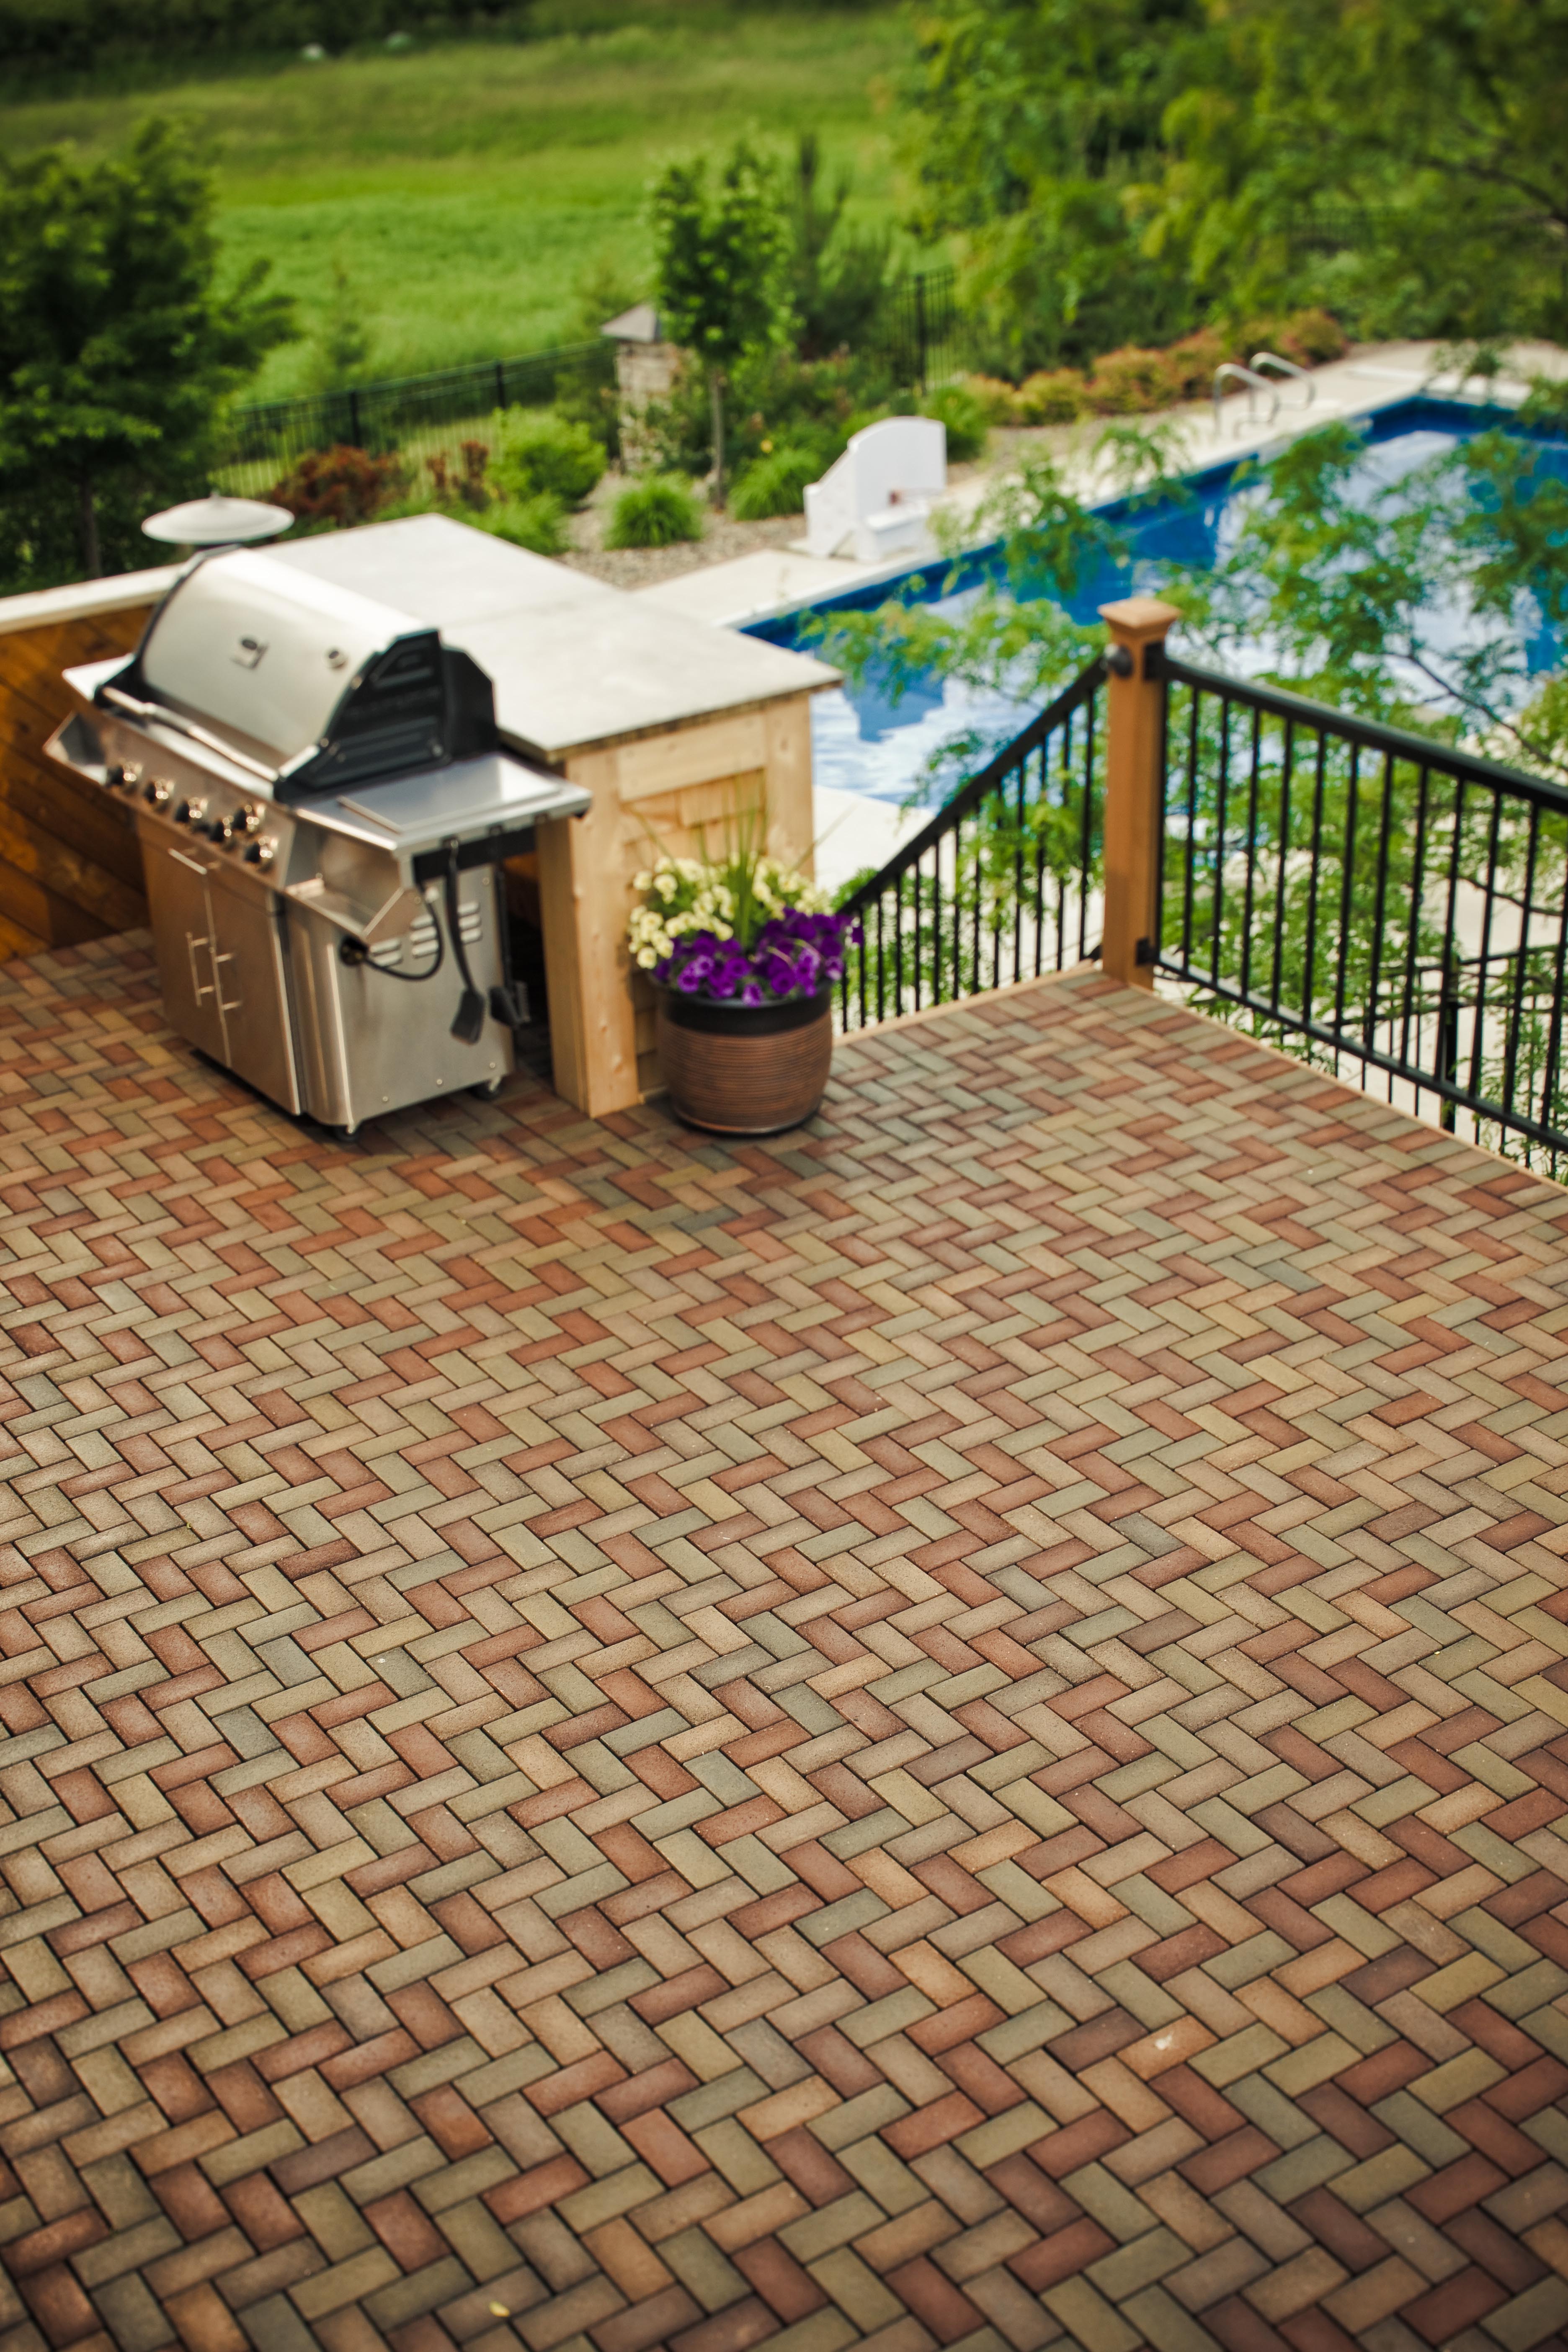 AZEK Resurface Pavers can bring a worn out deck back to life!